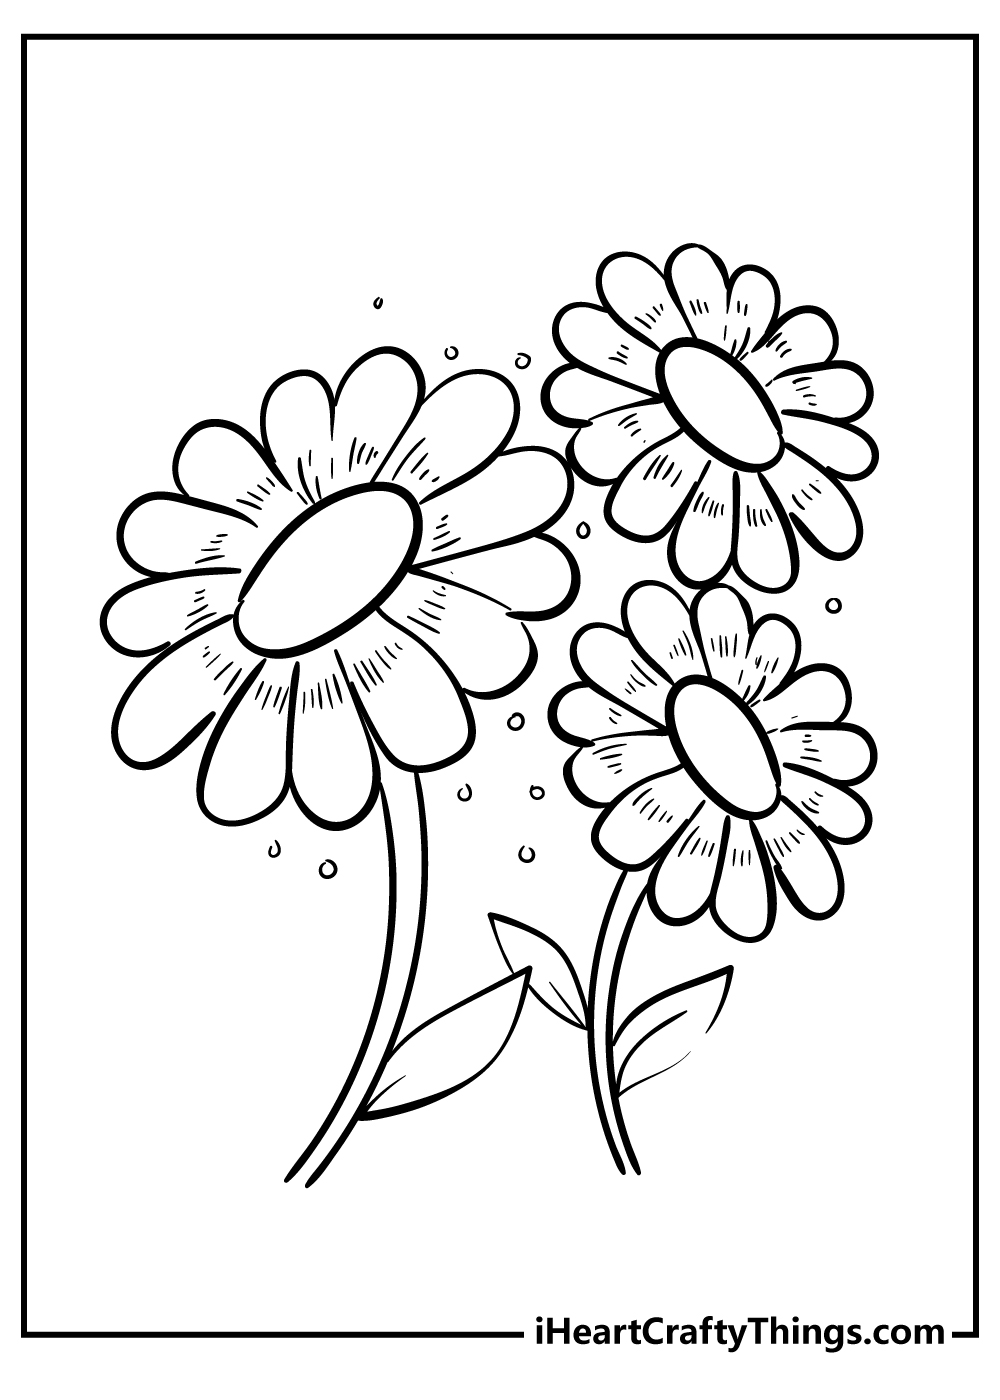 Daisy Coloring Book for adults free download